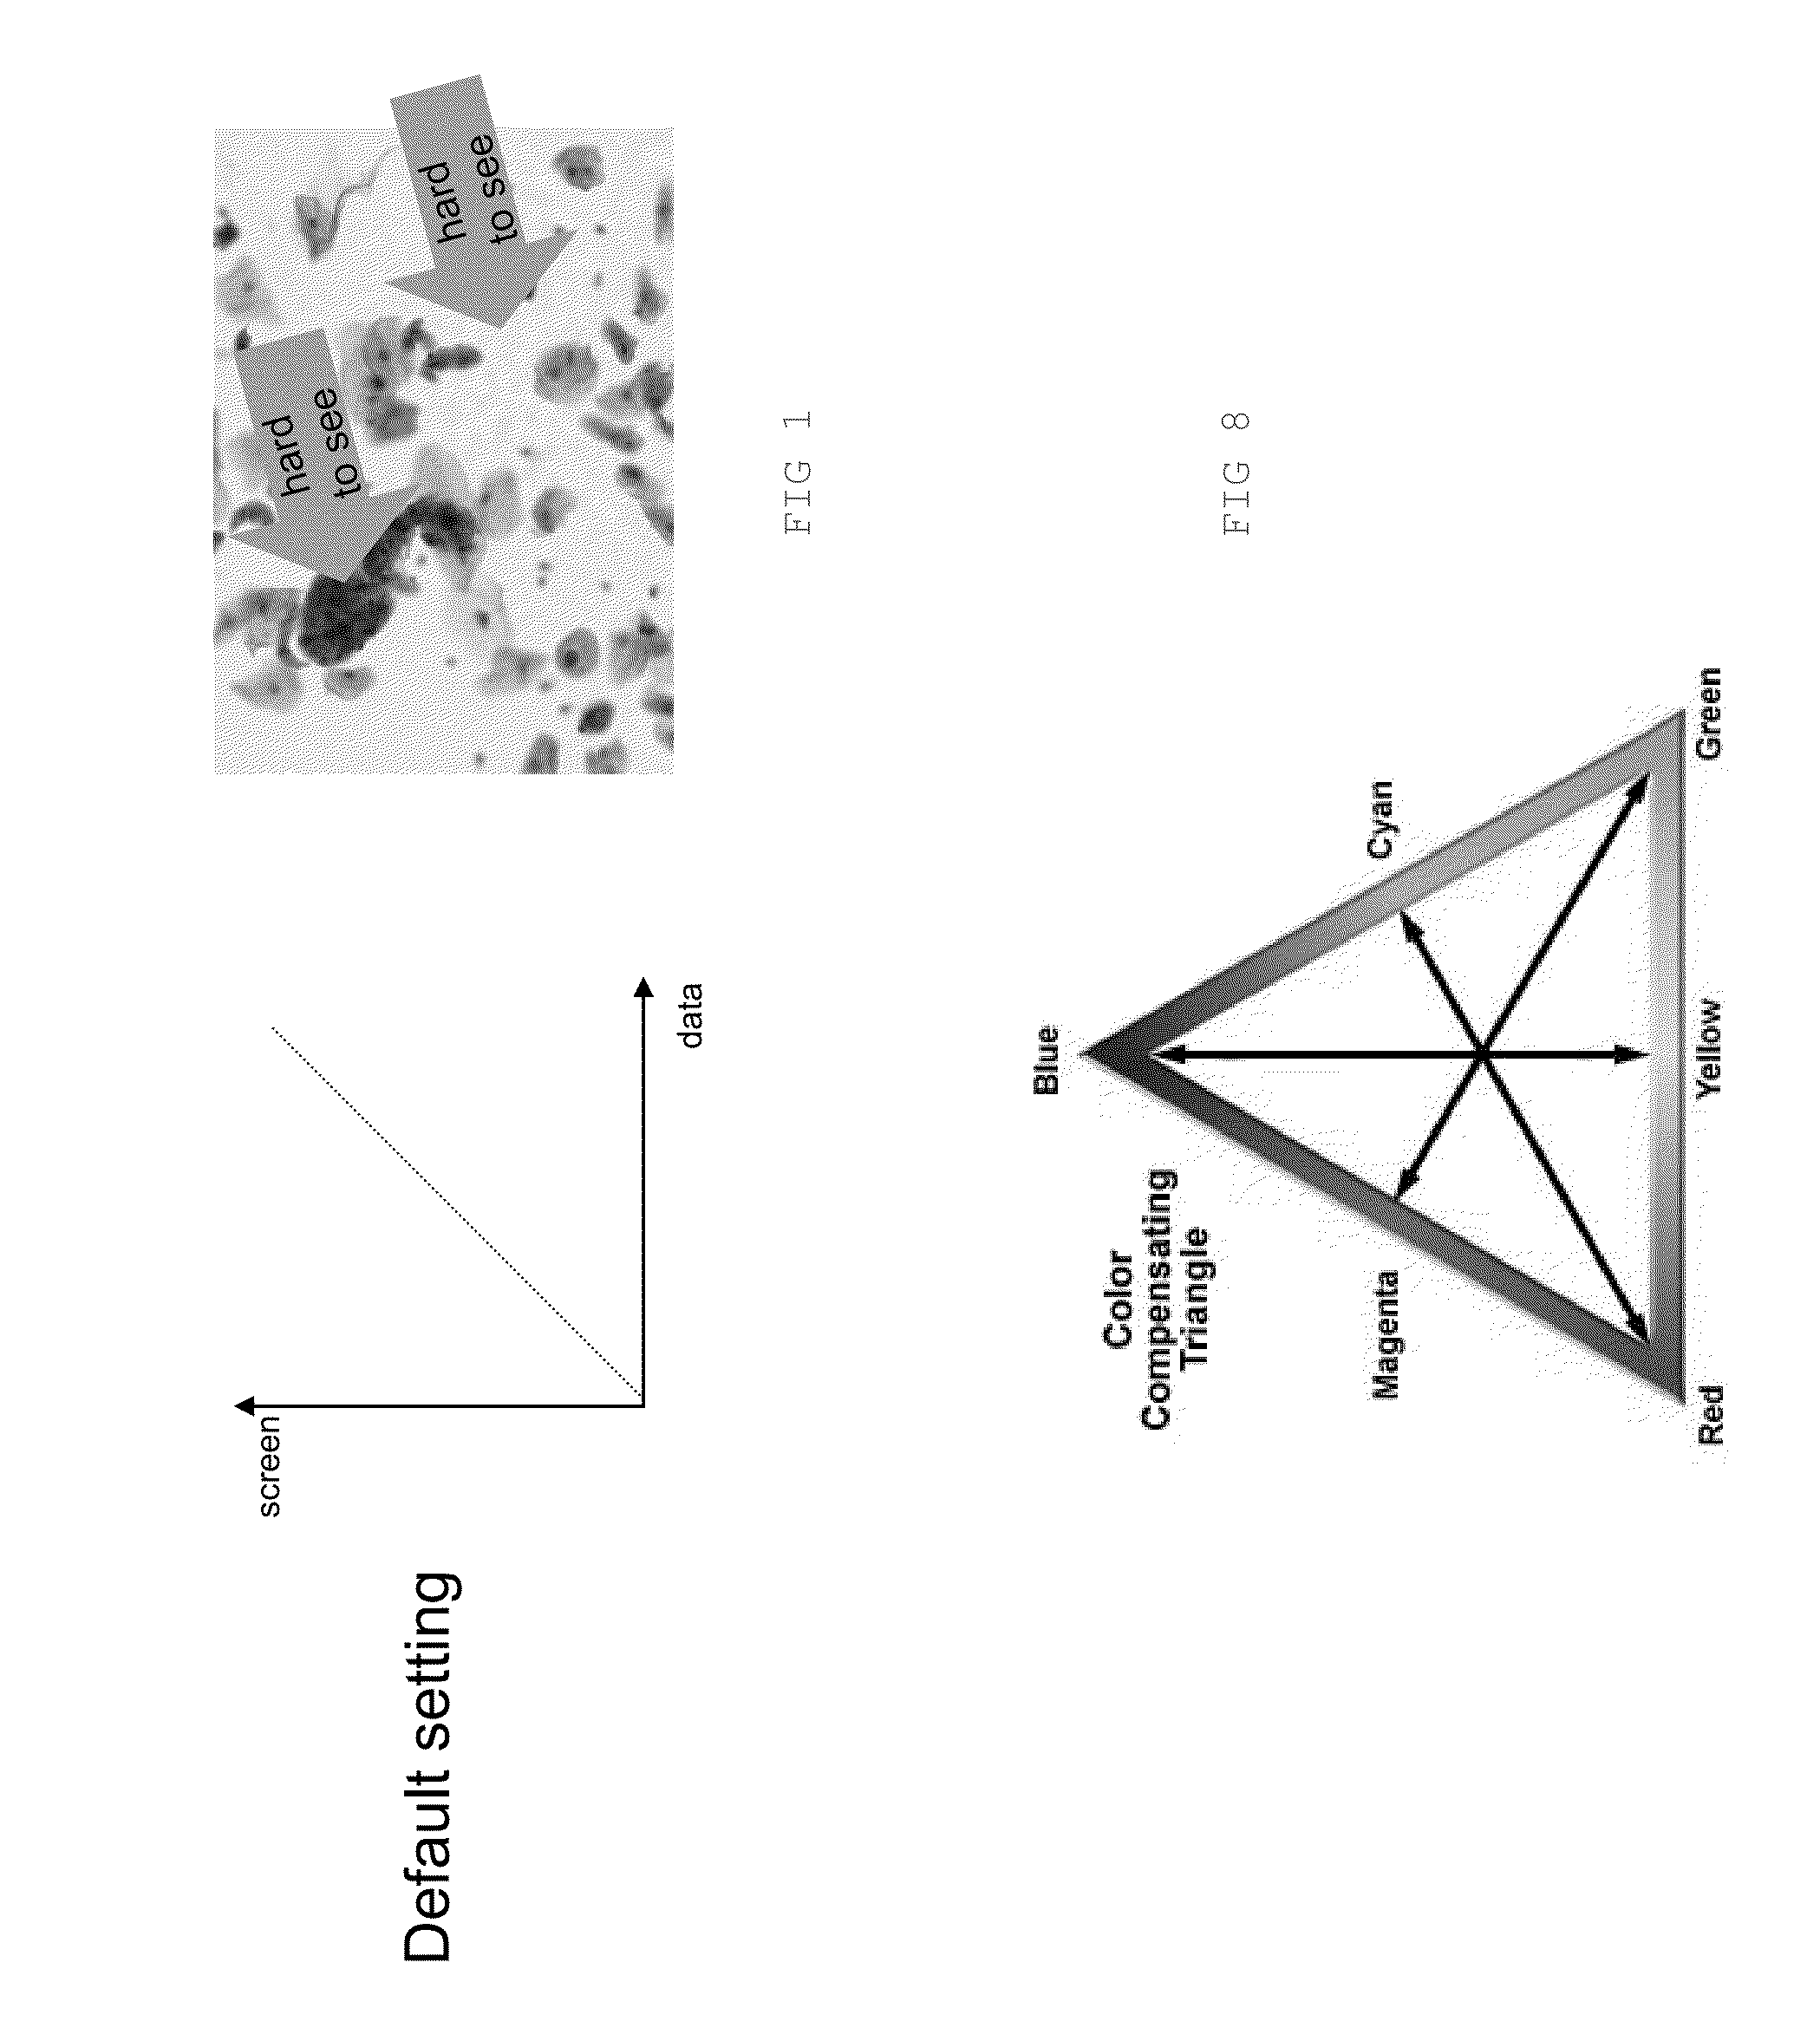 Display with optical microscope emulation functionality